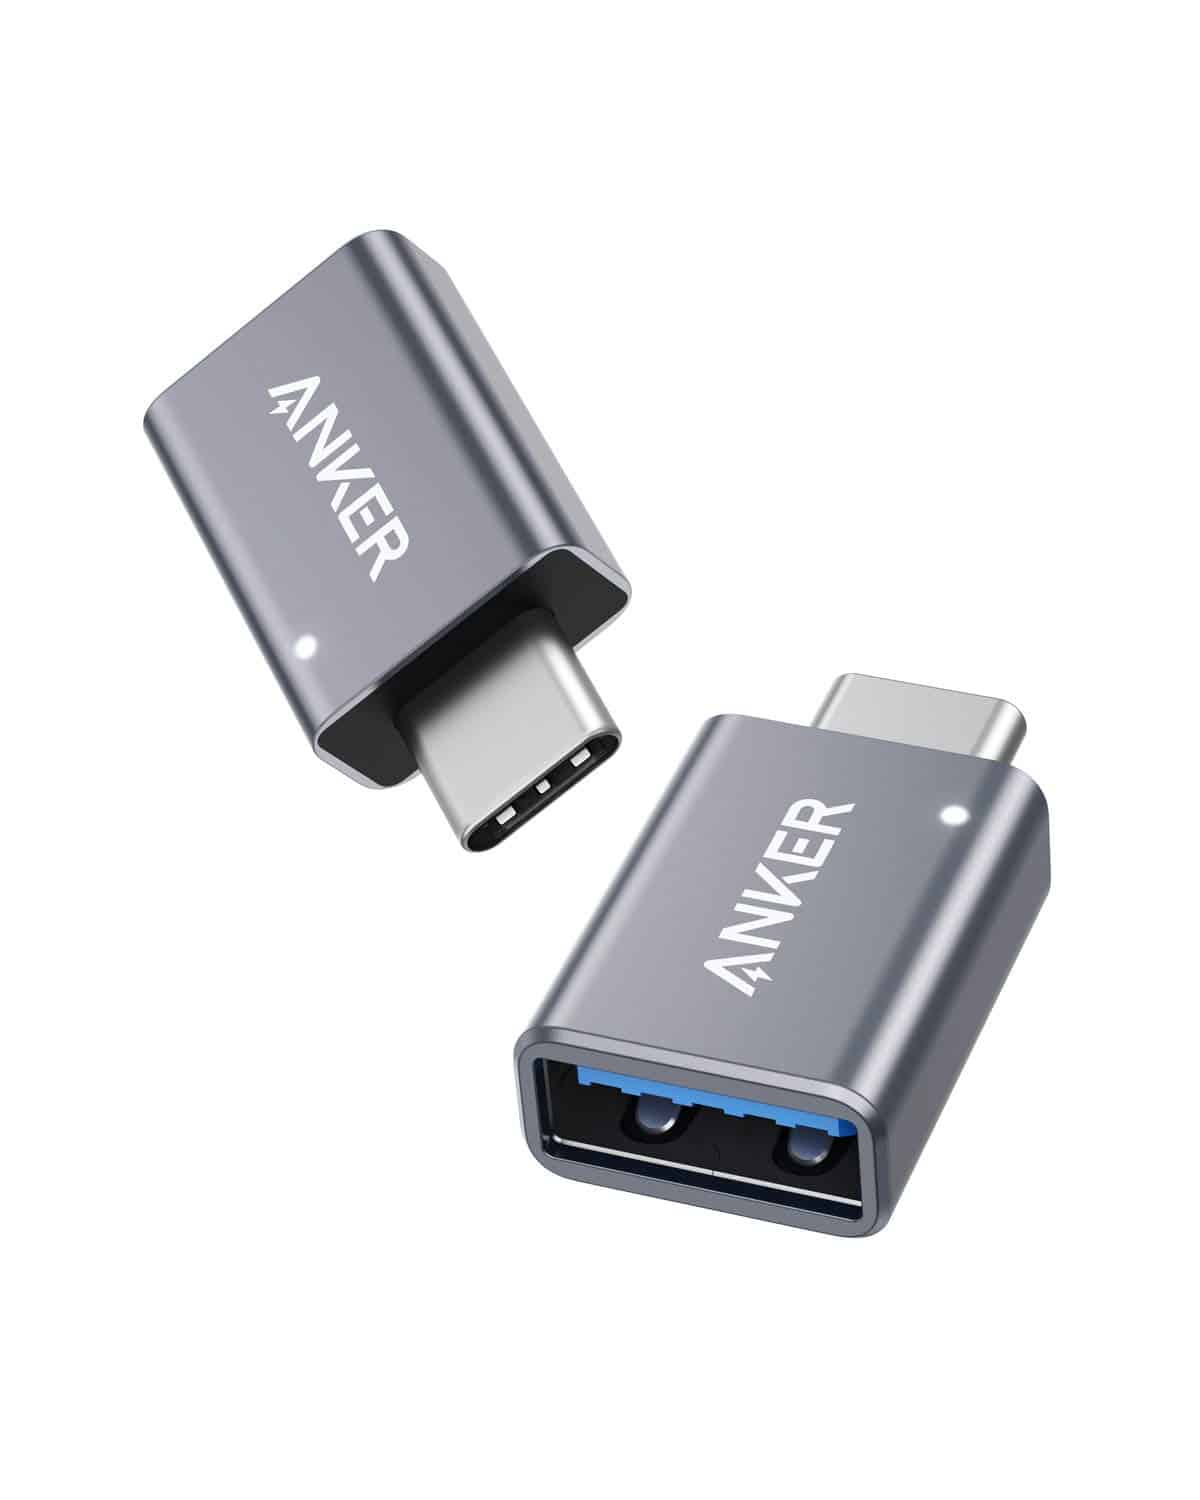 Anker's USB C adapter and high-speed data transfer